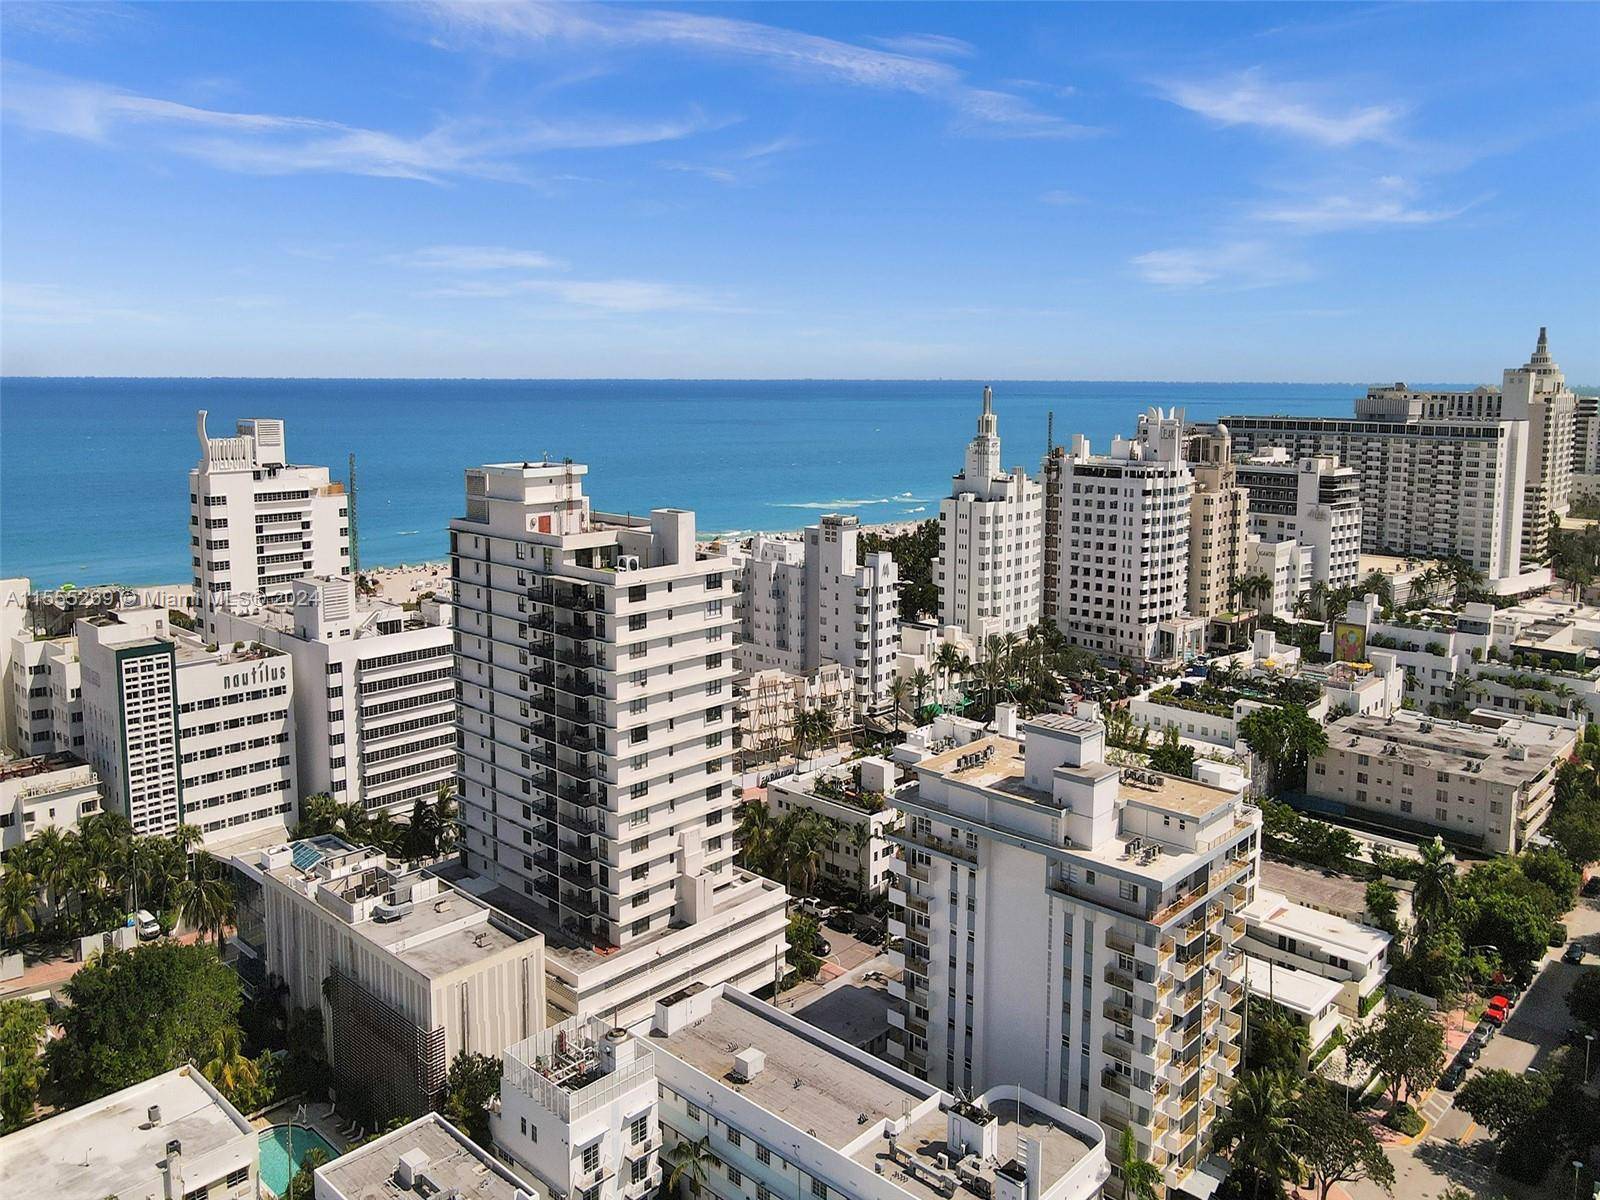 Seaside apartment haven across the white sand beaches of South Beach on Hotel Row.